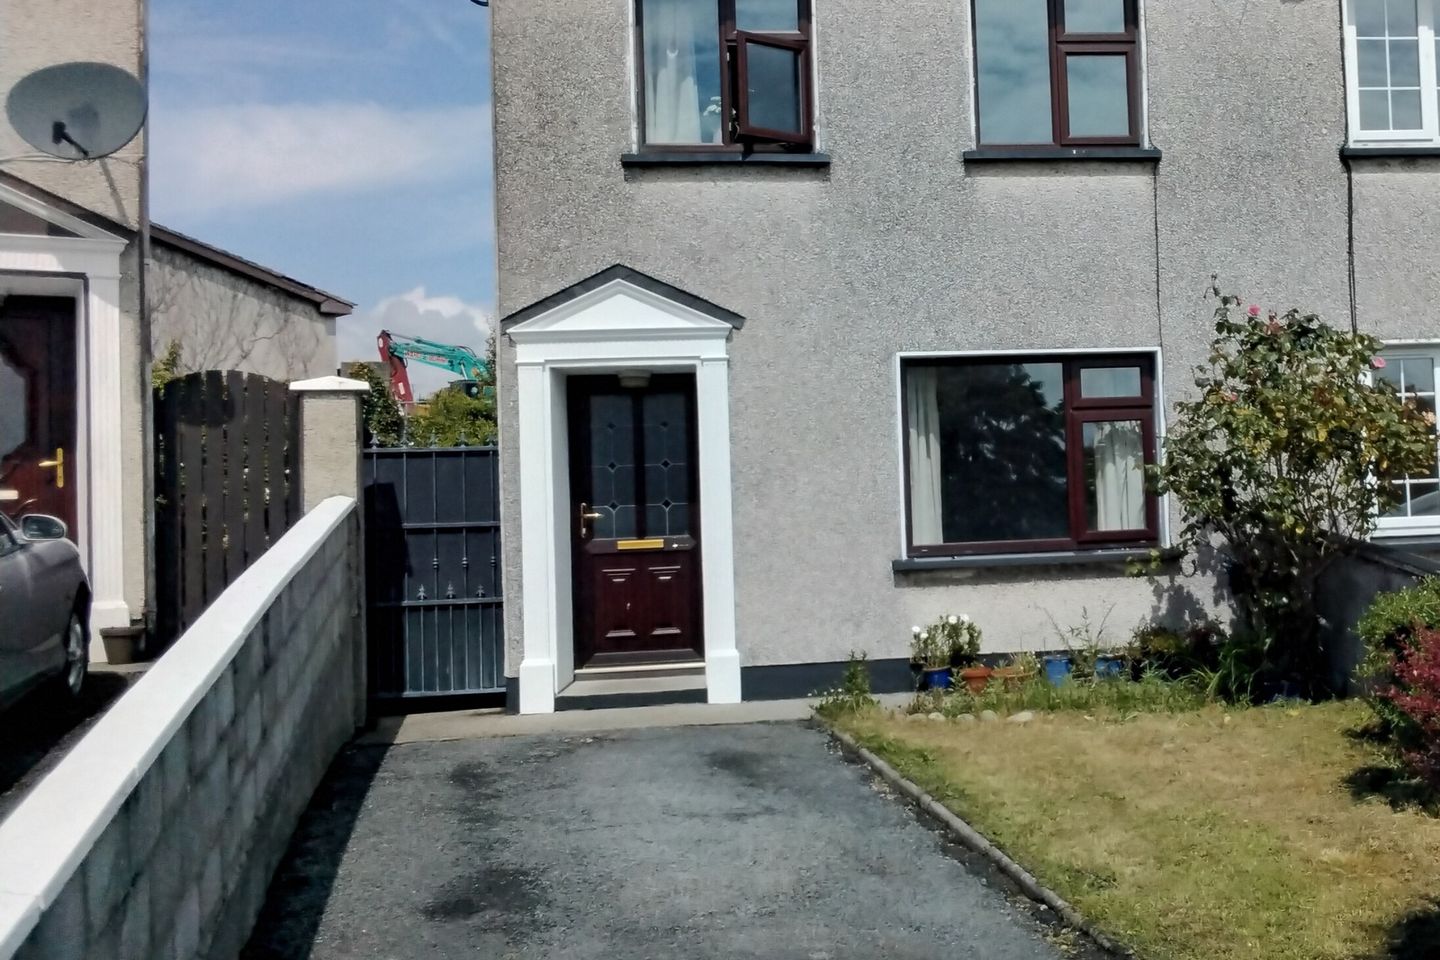 211 Laurel Park, Newcastle, Newcastle, Co. Galway